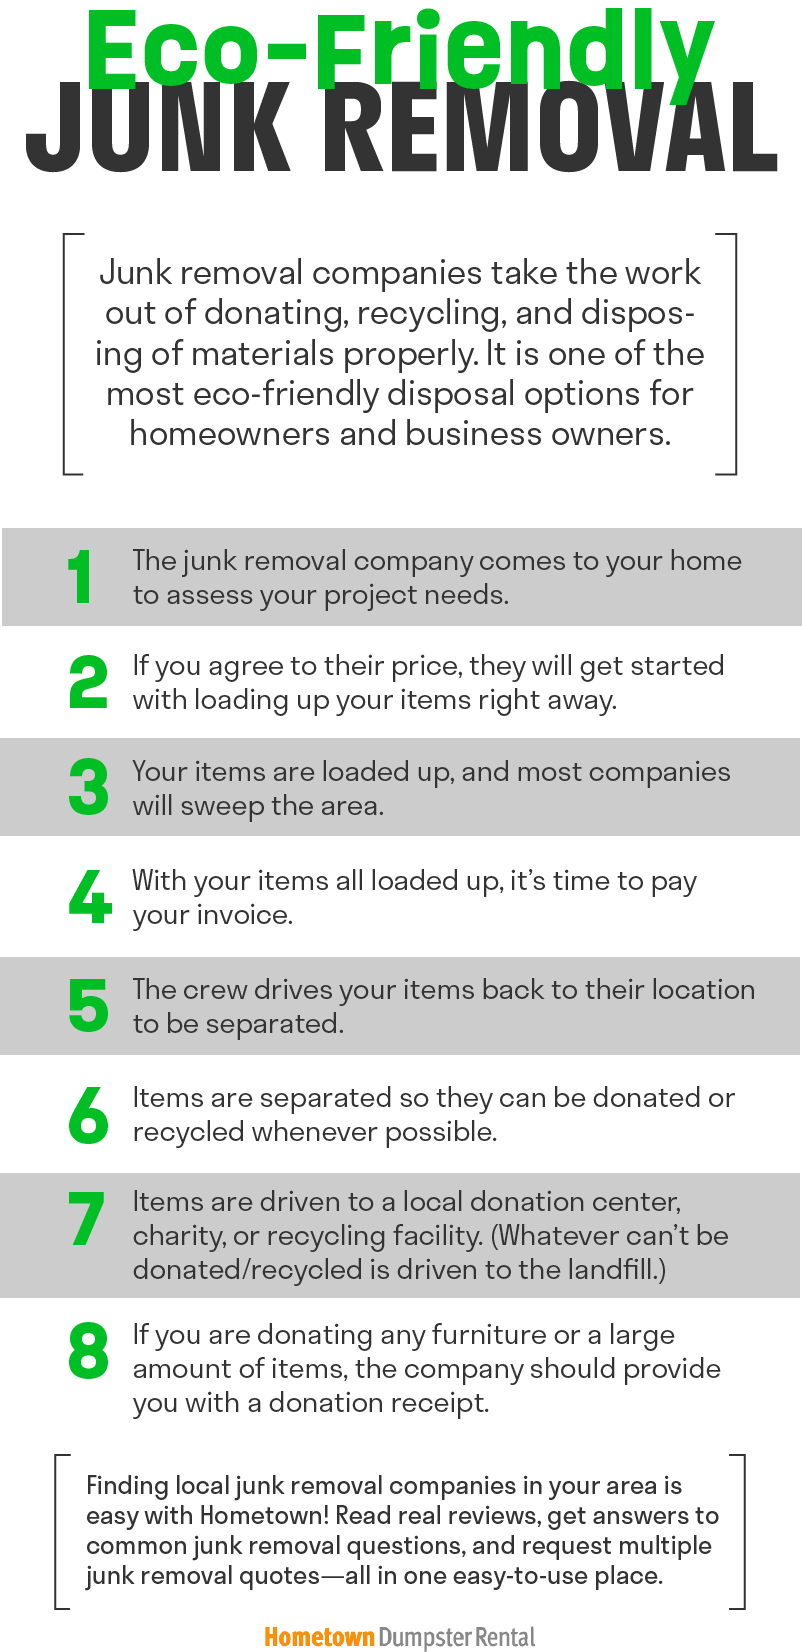 eco-friendly junk removal infographic